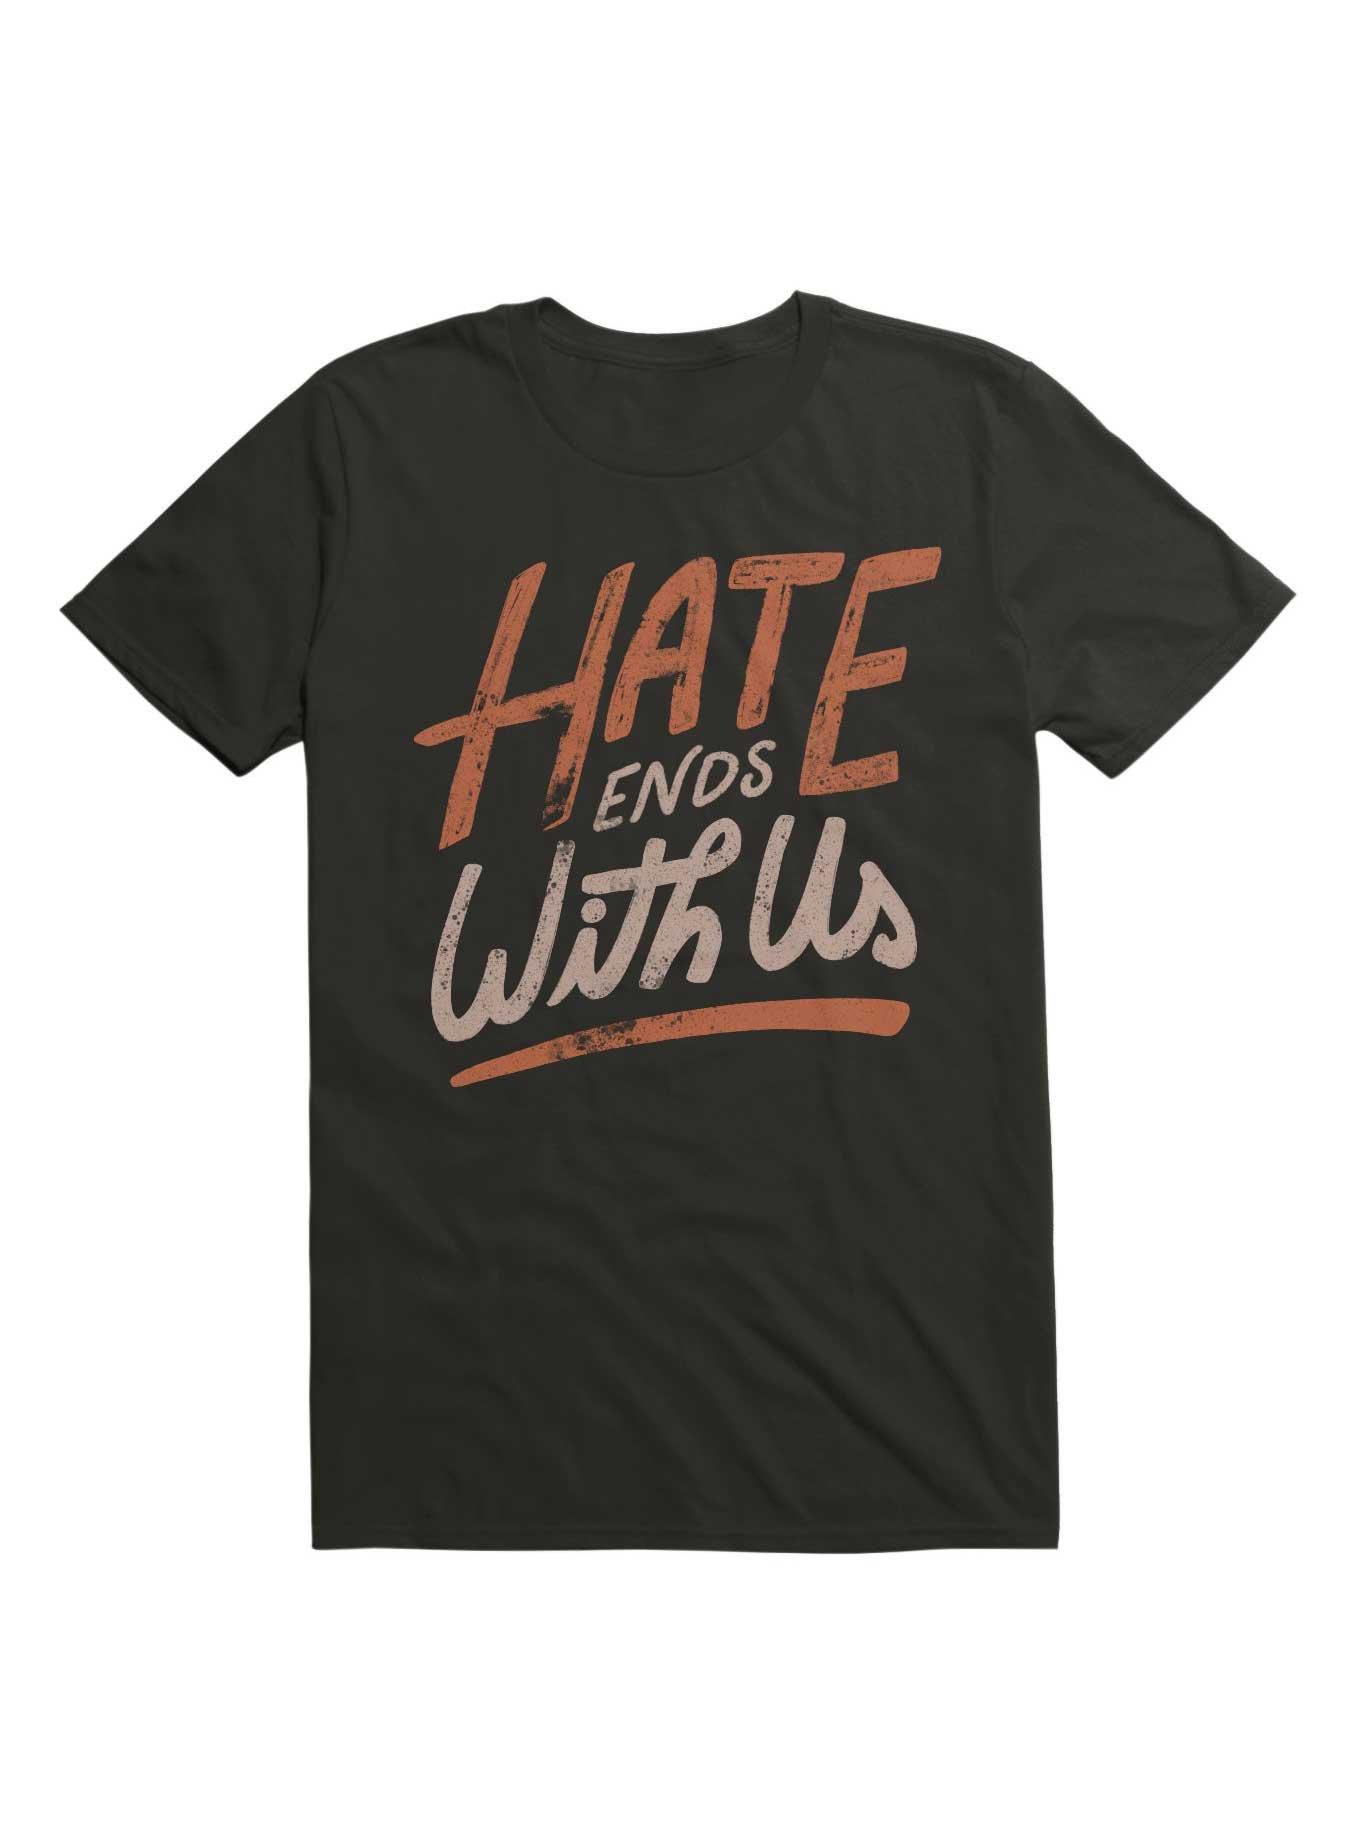 Hate Ends With Us T-Shirt, BLACK, hi-res